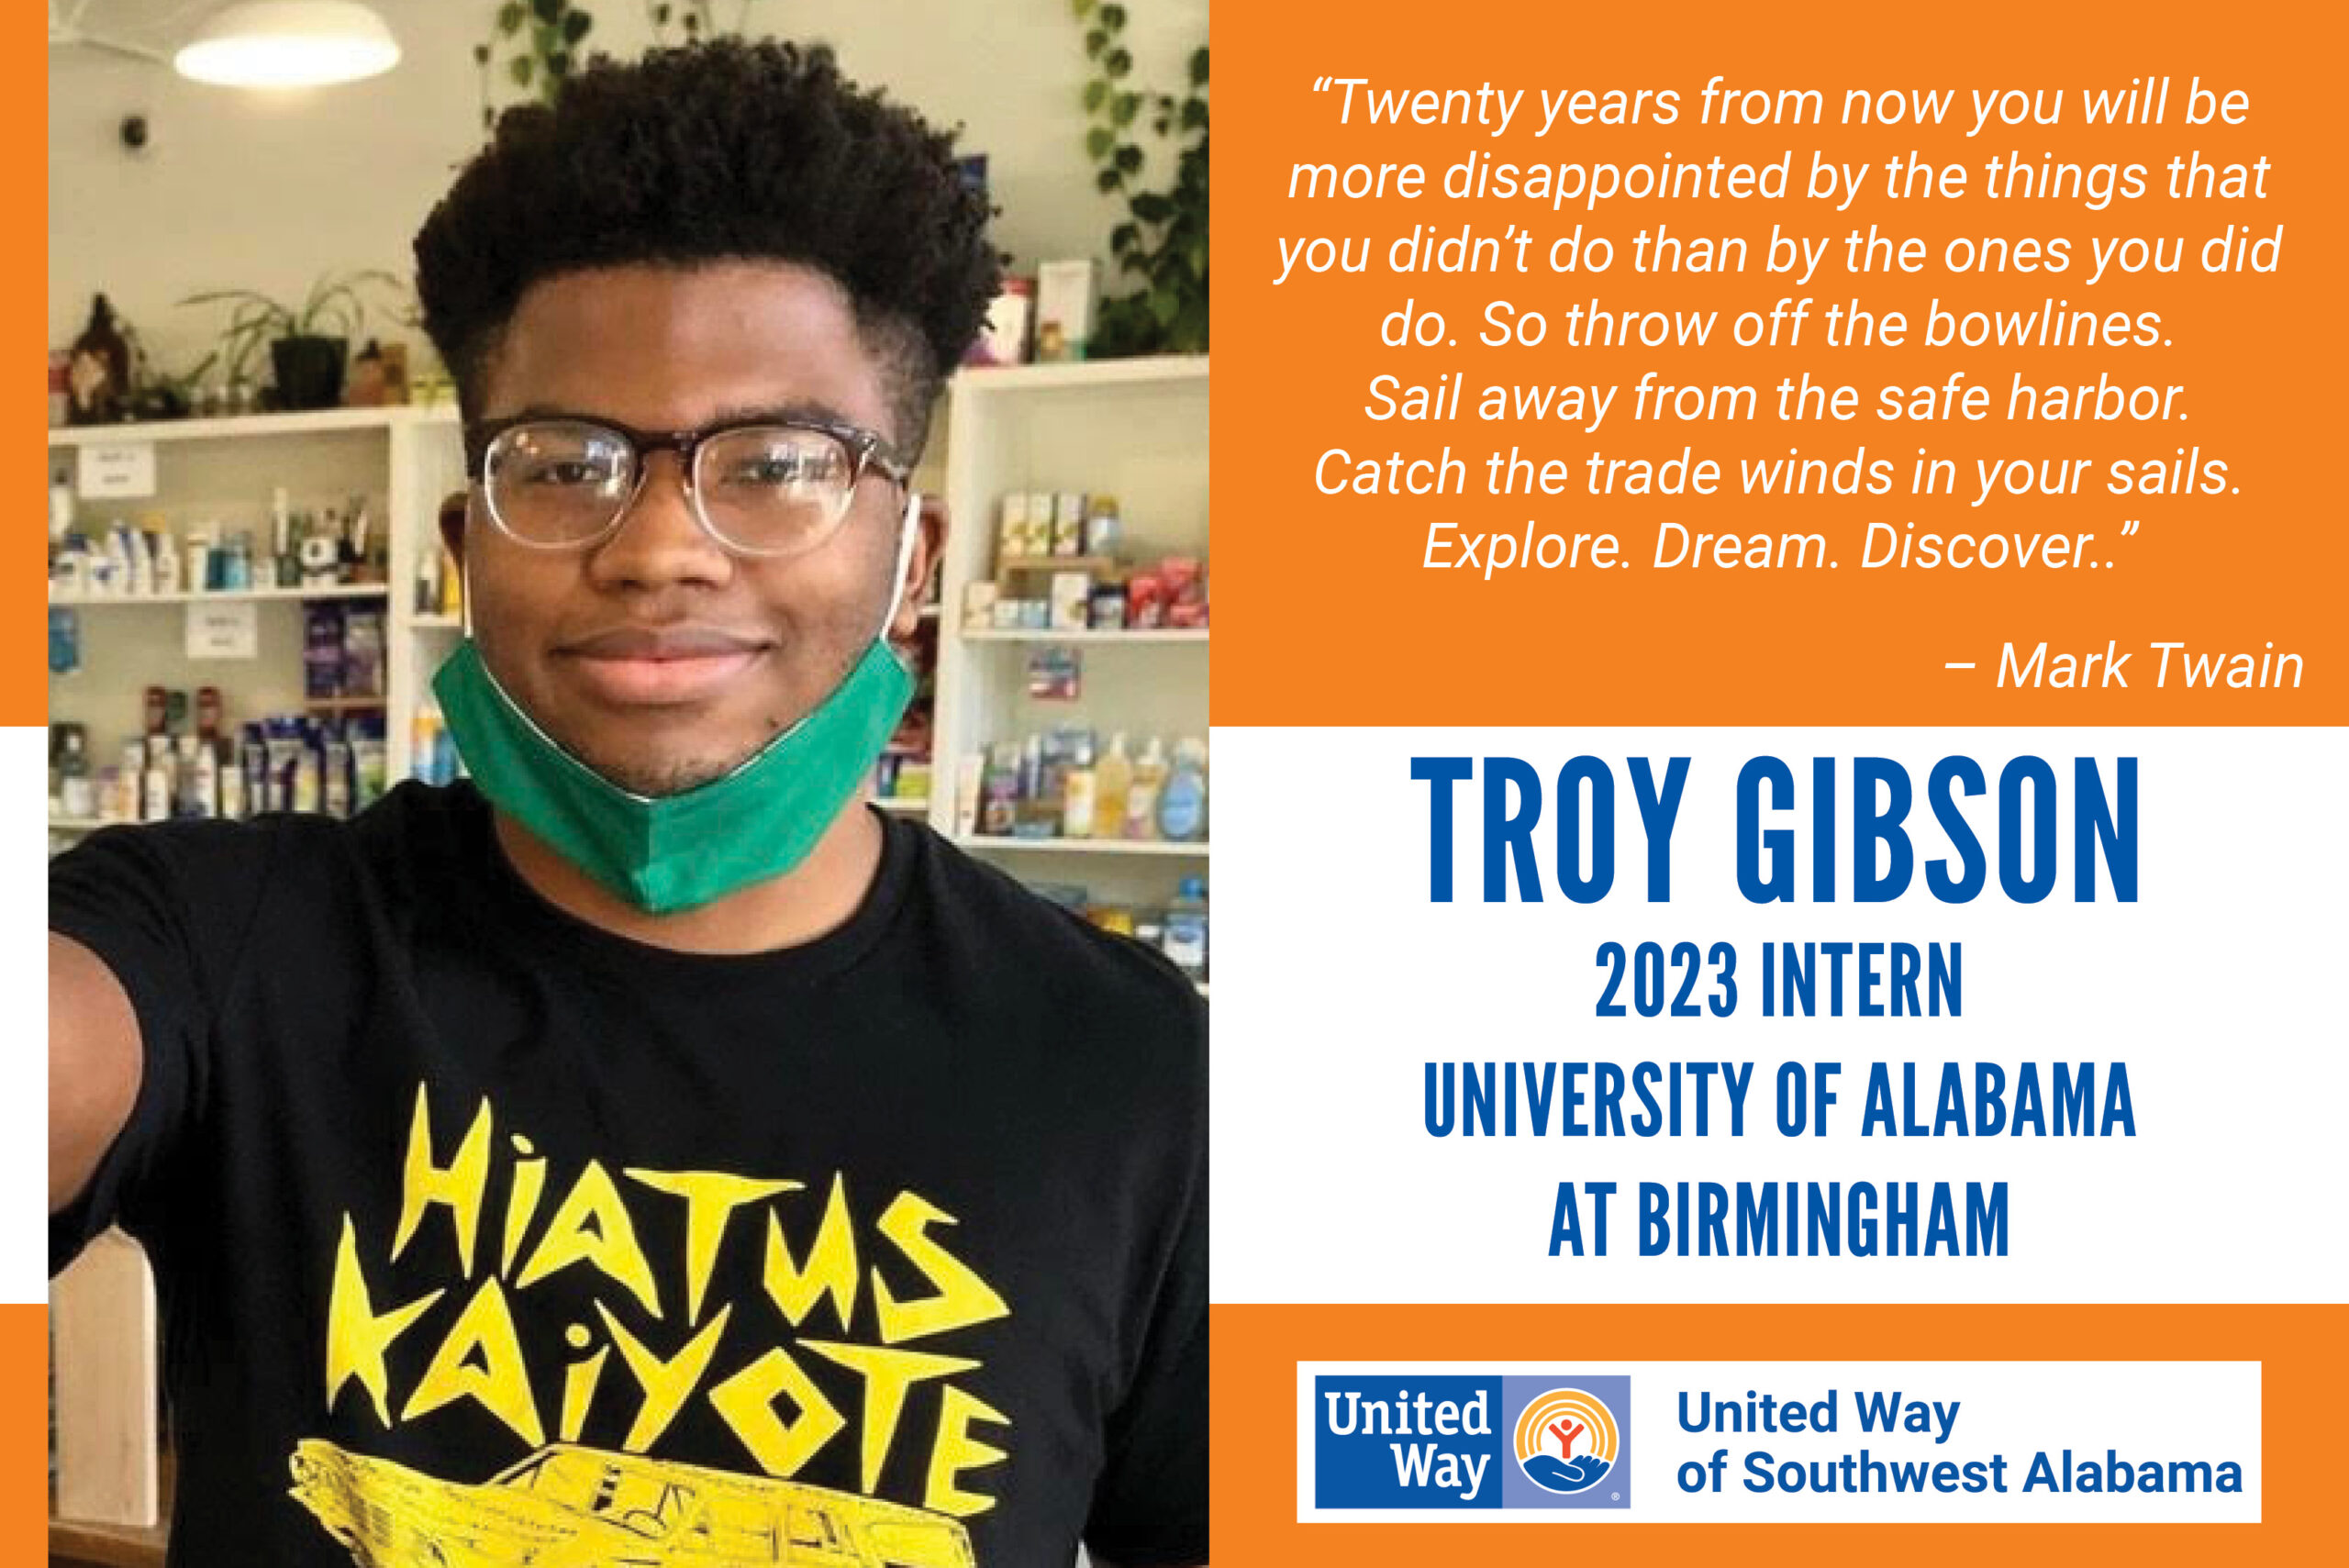 Troy Gibson, 2023 Intern from the University of Alabama at Birmingham. "Twenty years from now you will be more disappointed by the things that you didn't do than by the ones you did do. So throw off the bowlines. Sail away from the safe harbor. Catch the trade winds in your sails. Explore. Dream. Discover." - Mark Twain